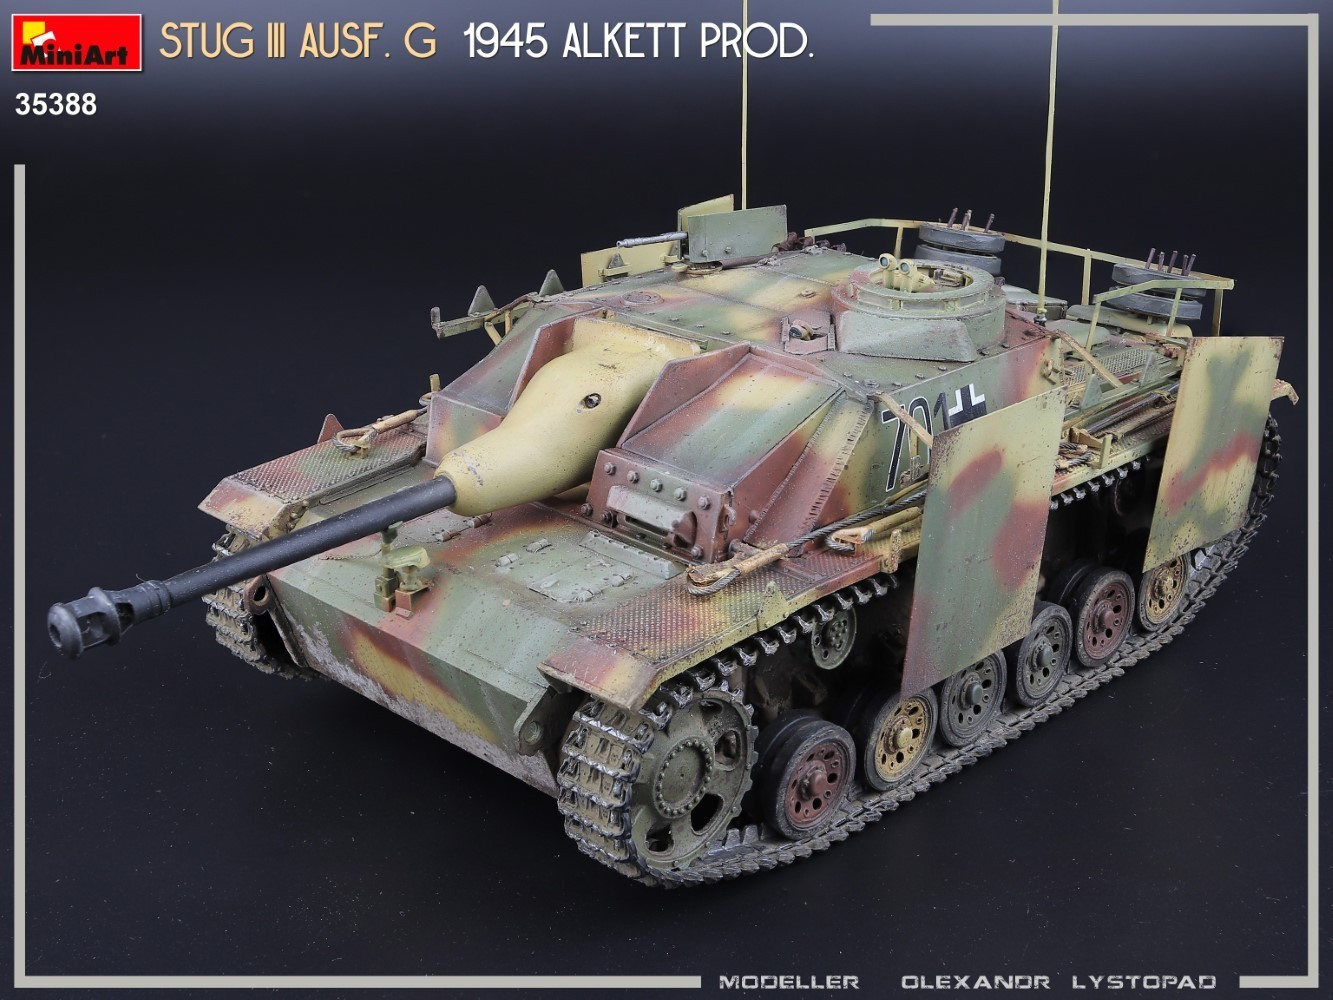 MiniArt to Release Highly Detailed 1/35 StuG III Ausf. G 1945 Alkett Prod. Model Kit Painting and Marking-15